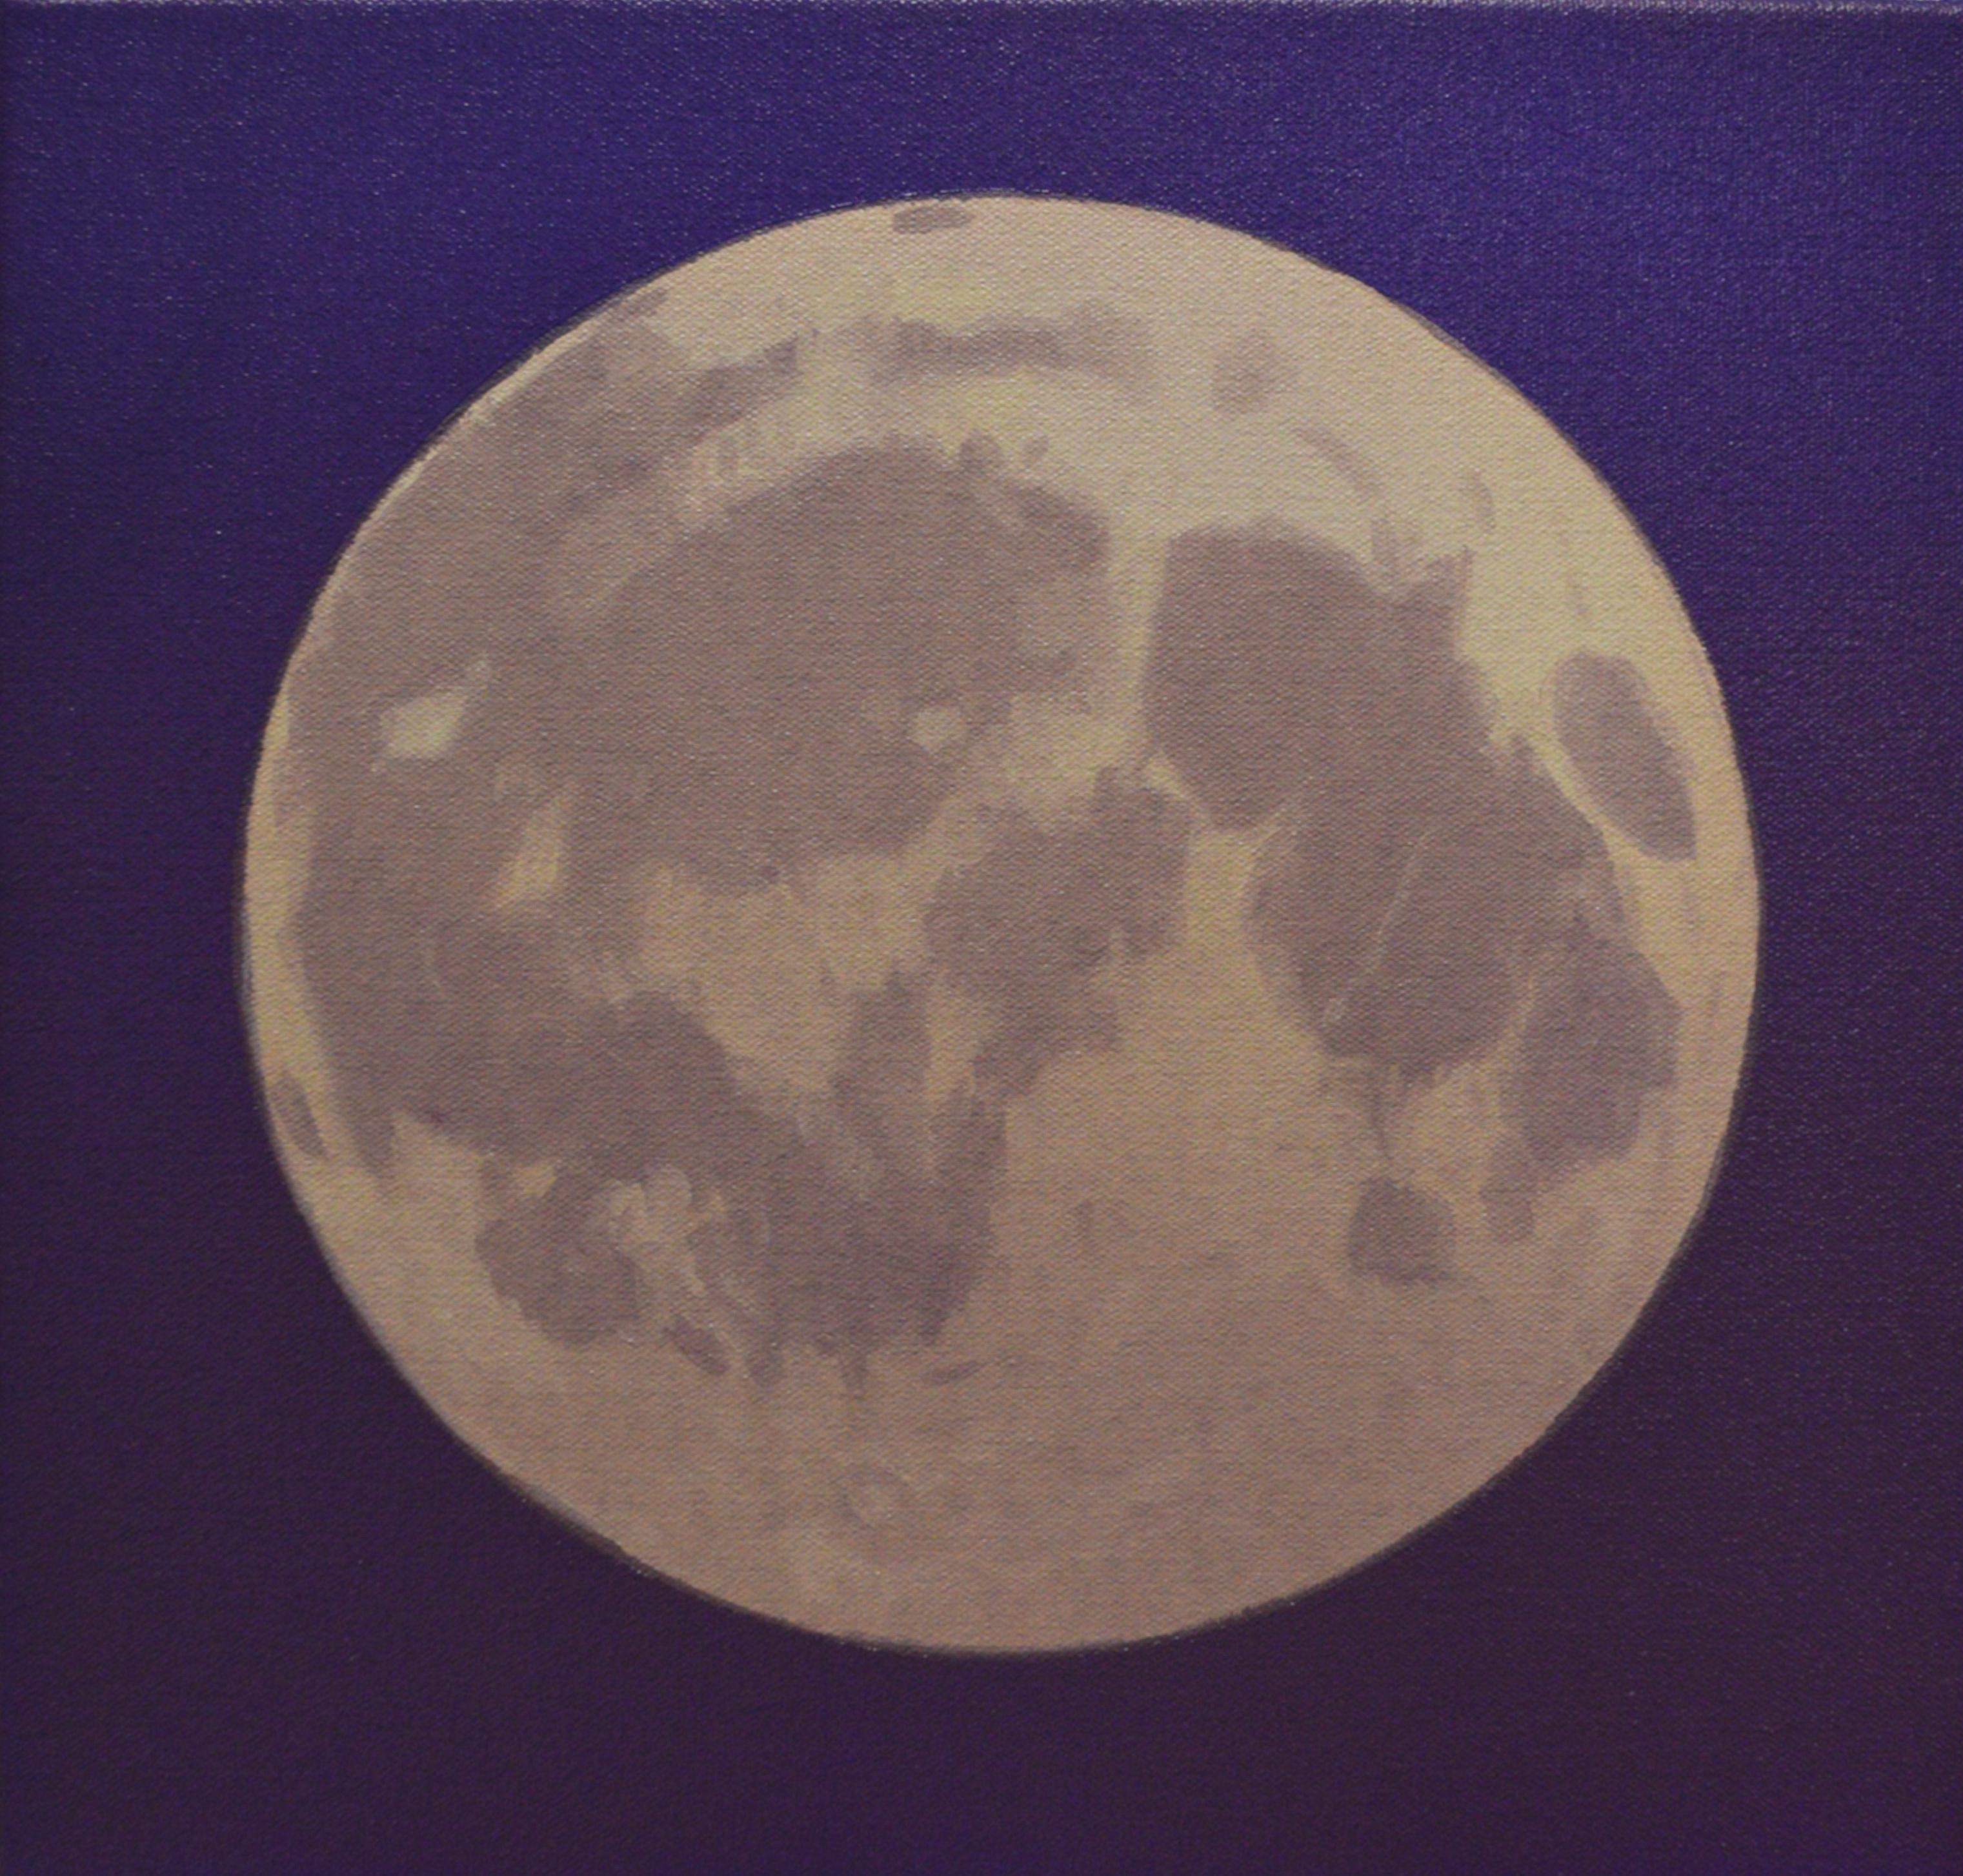 Moon 2 - Painting by Beau Carey